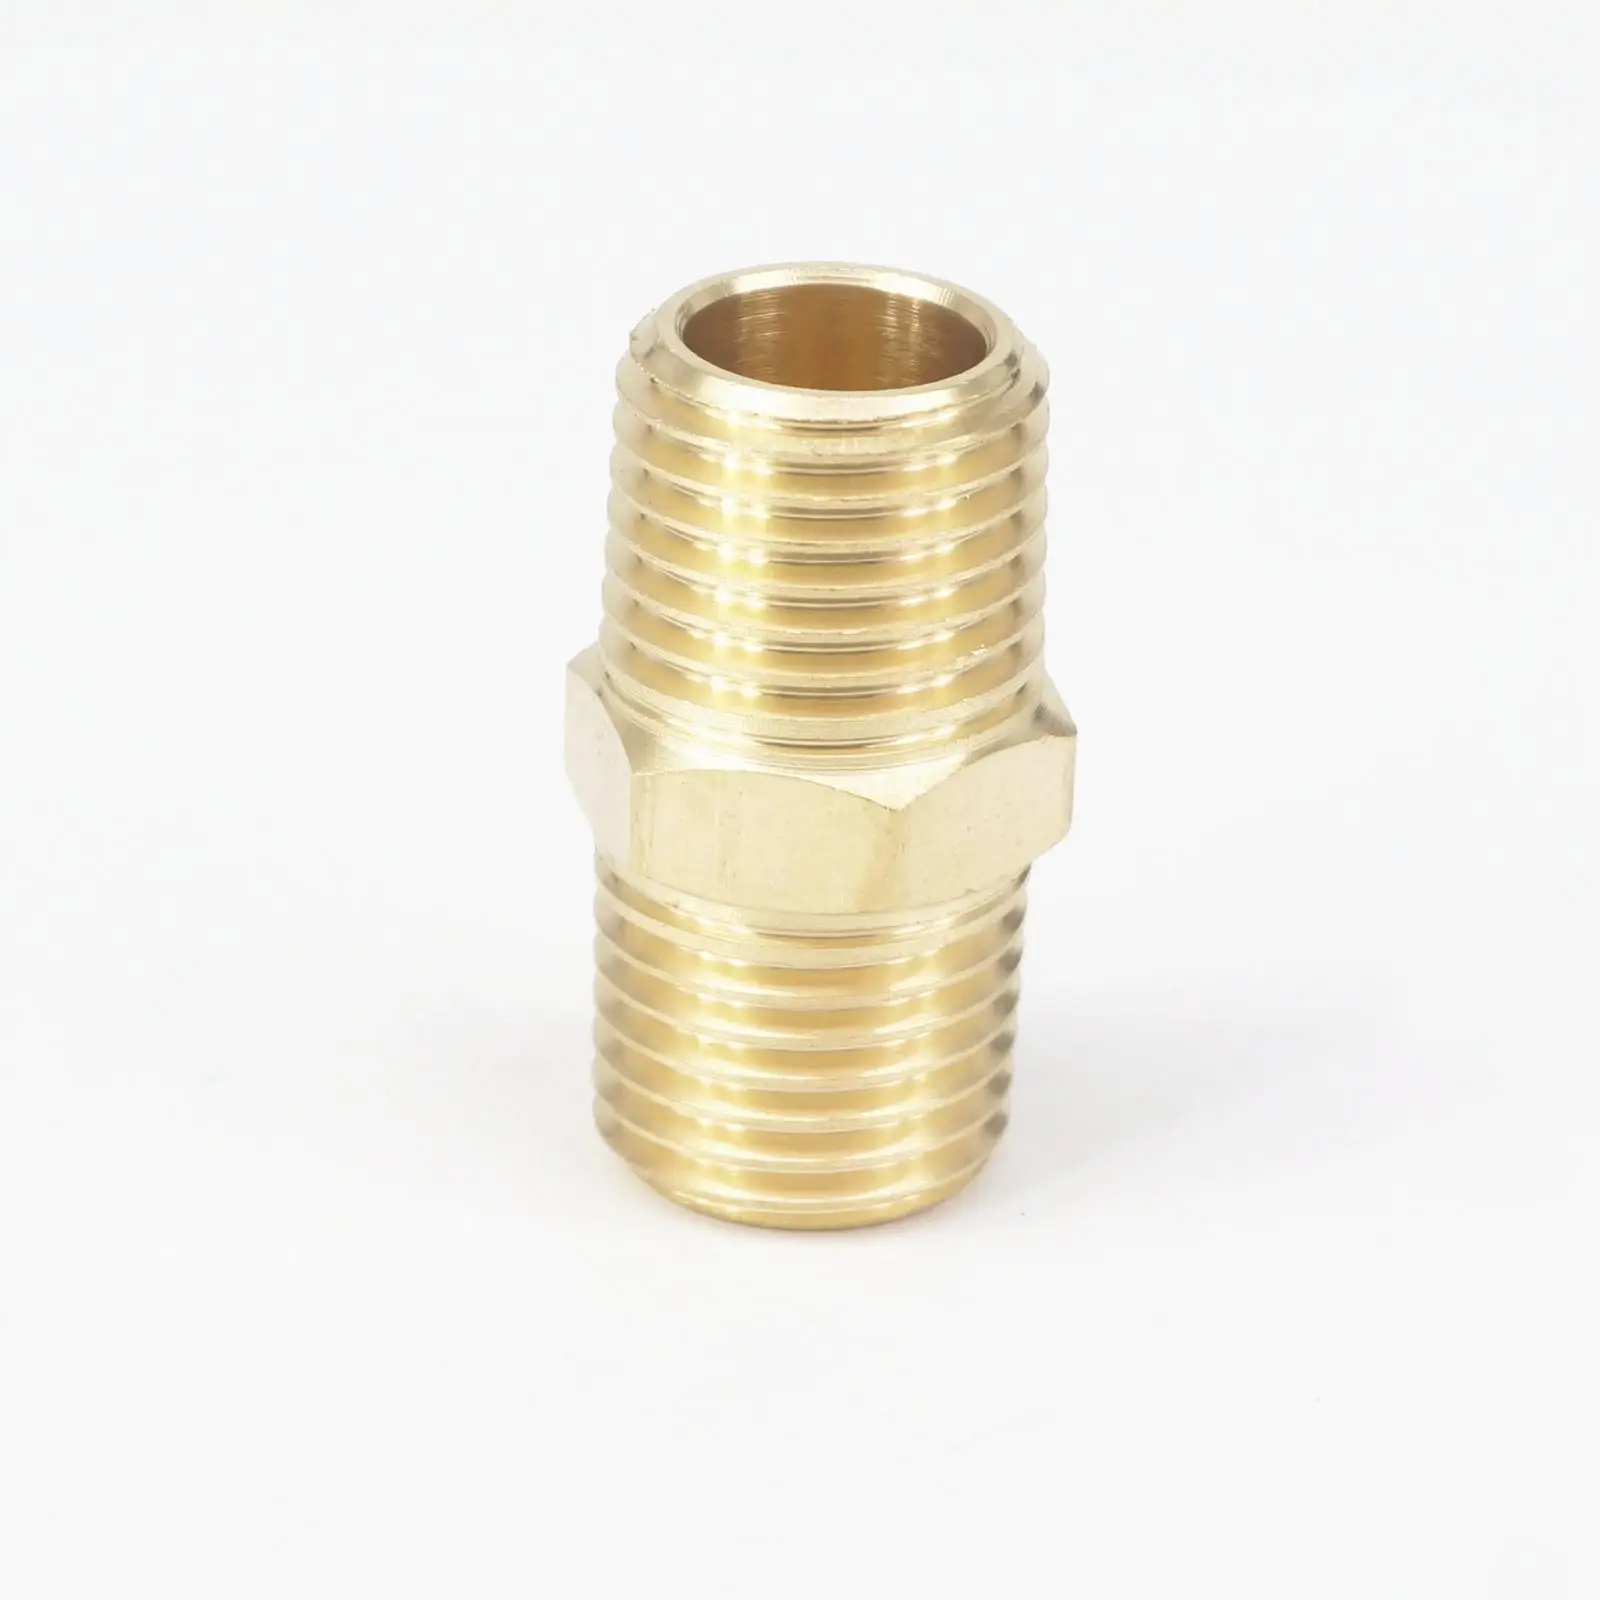 Solid Brass Hex Adapter Fitting Reducer 1//8 Male 1//4 Male NPT Air Fuel Water